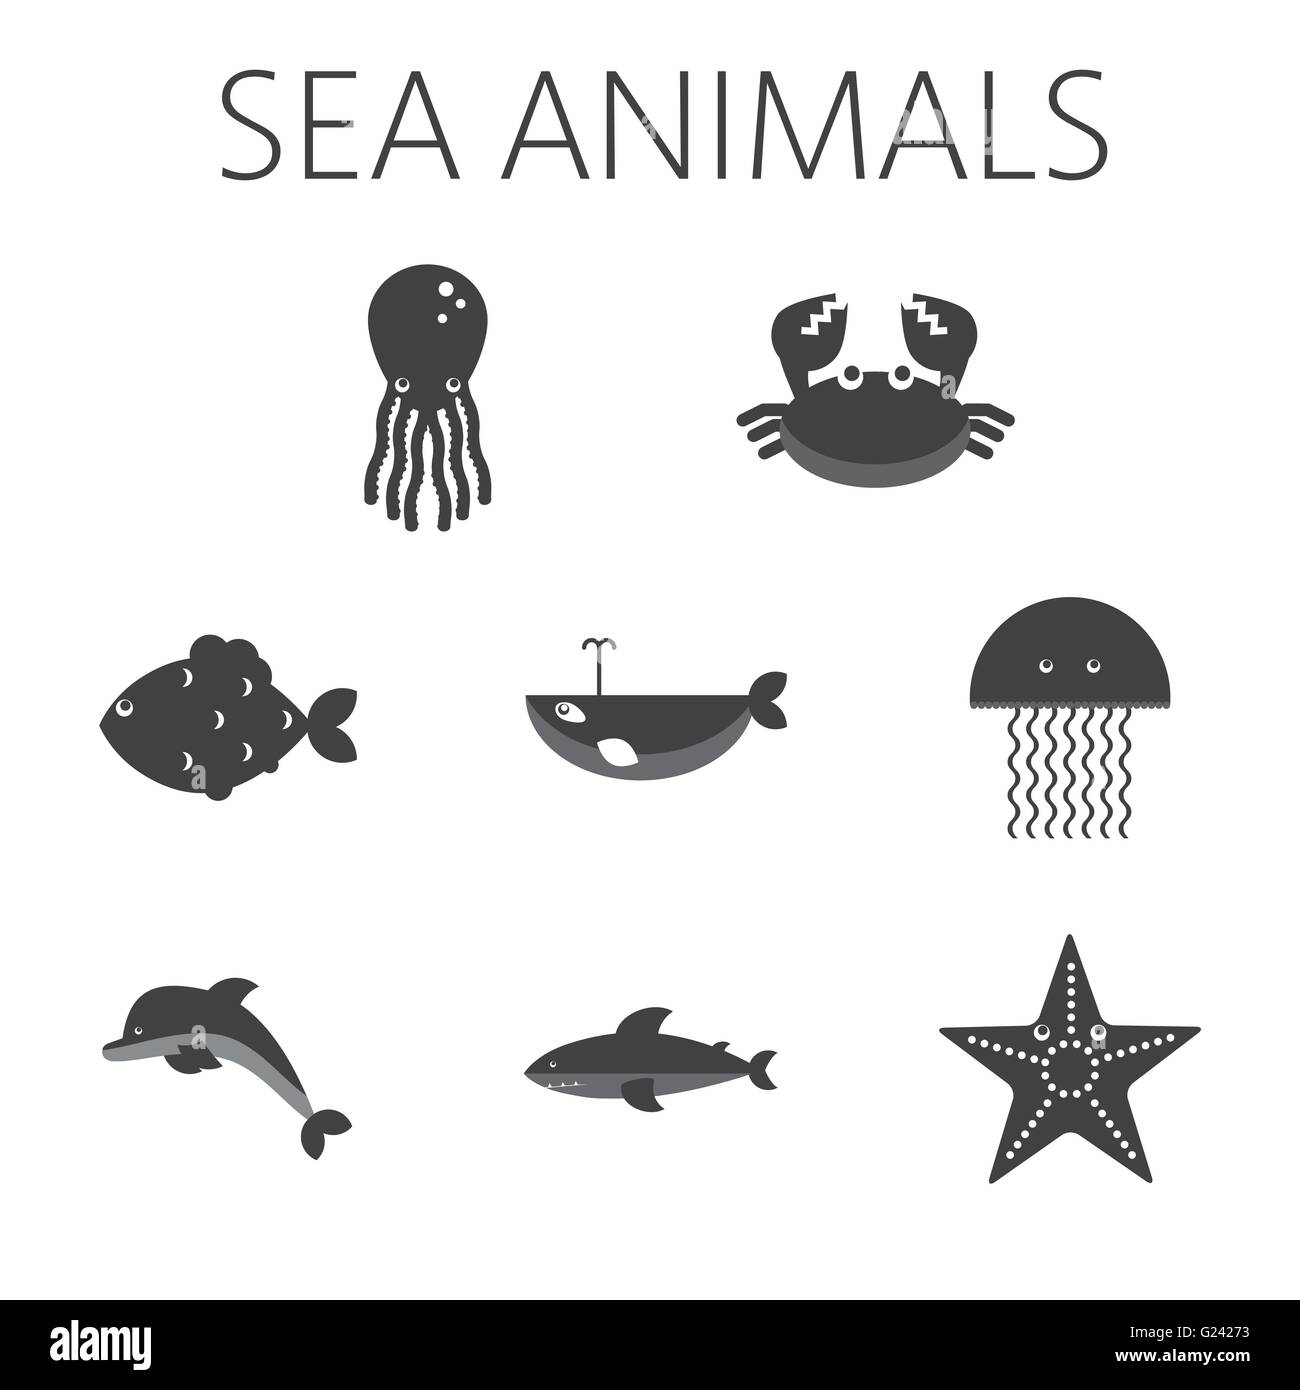 Black sea animal set in outlines with octopus, crab, fish, penguin, shark, whale, jellyfish and starfish. Digital vector image. Stock Vector